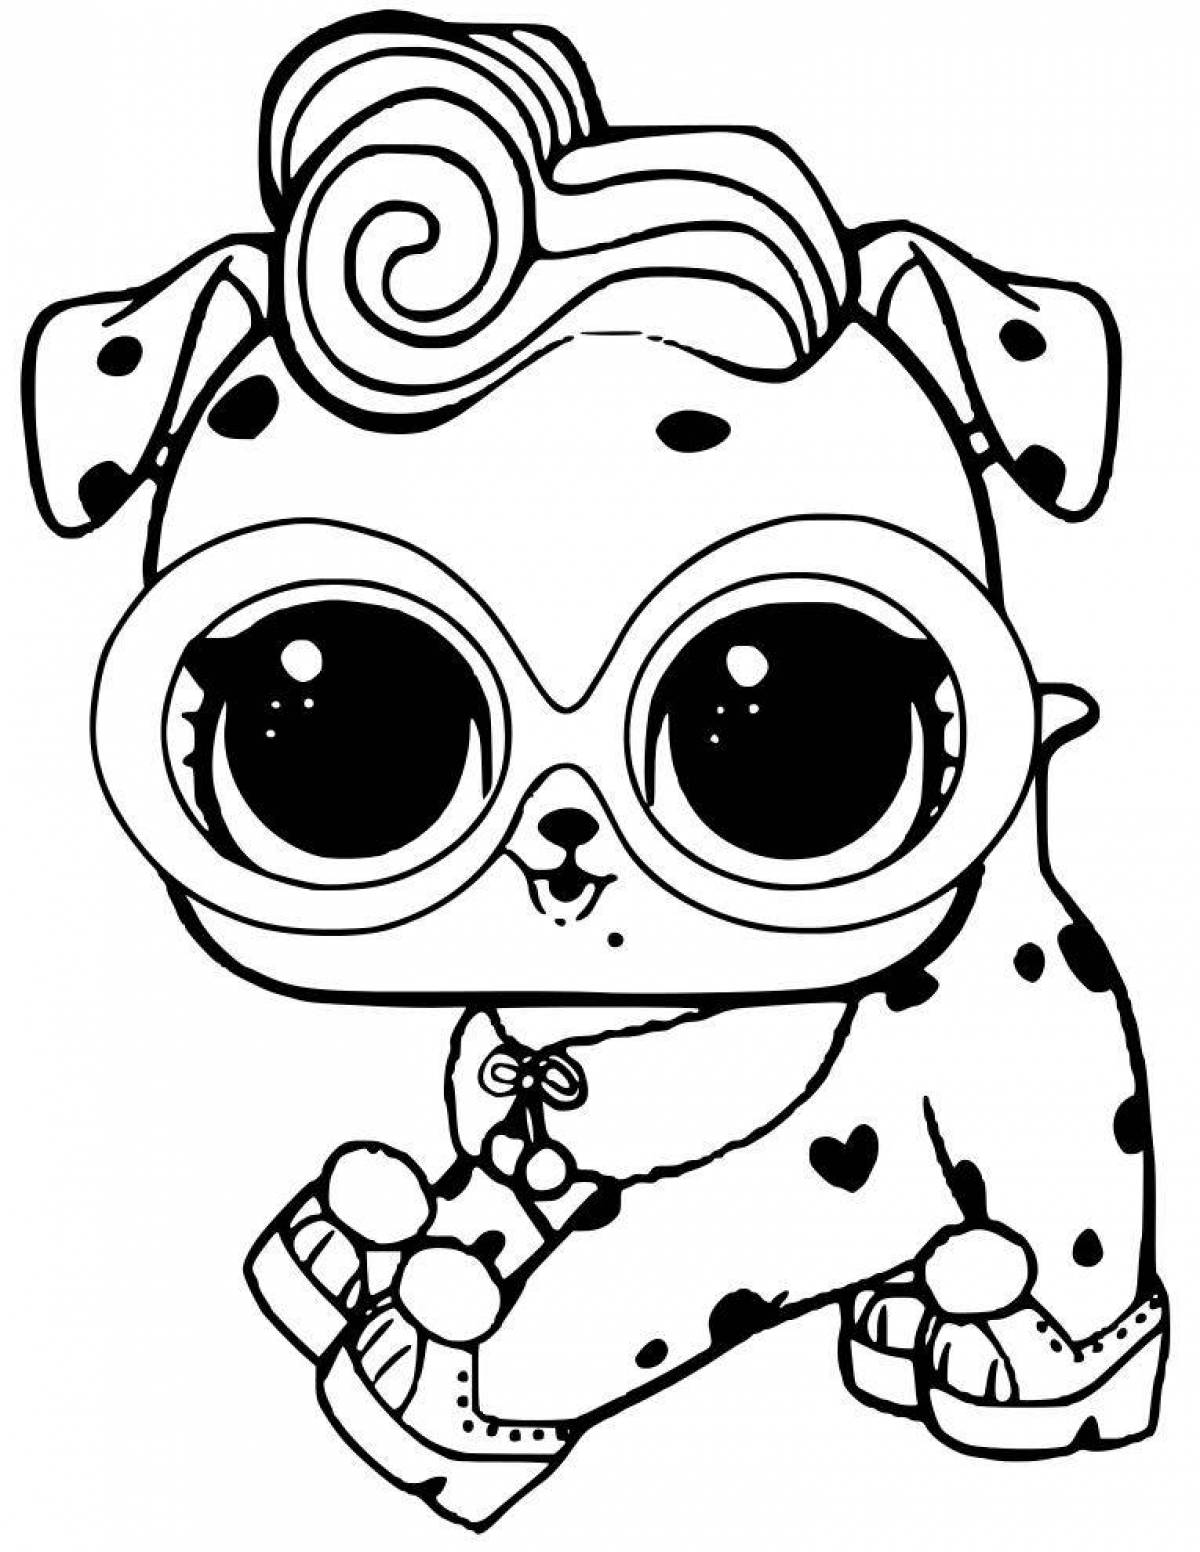 Outrageous lol animal coloring pages